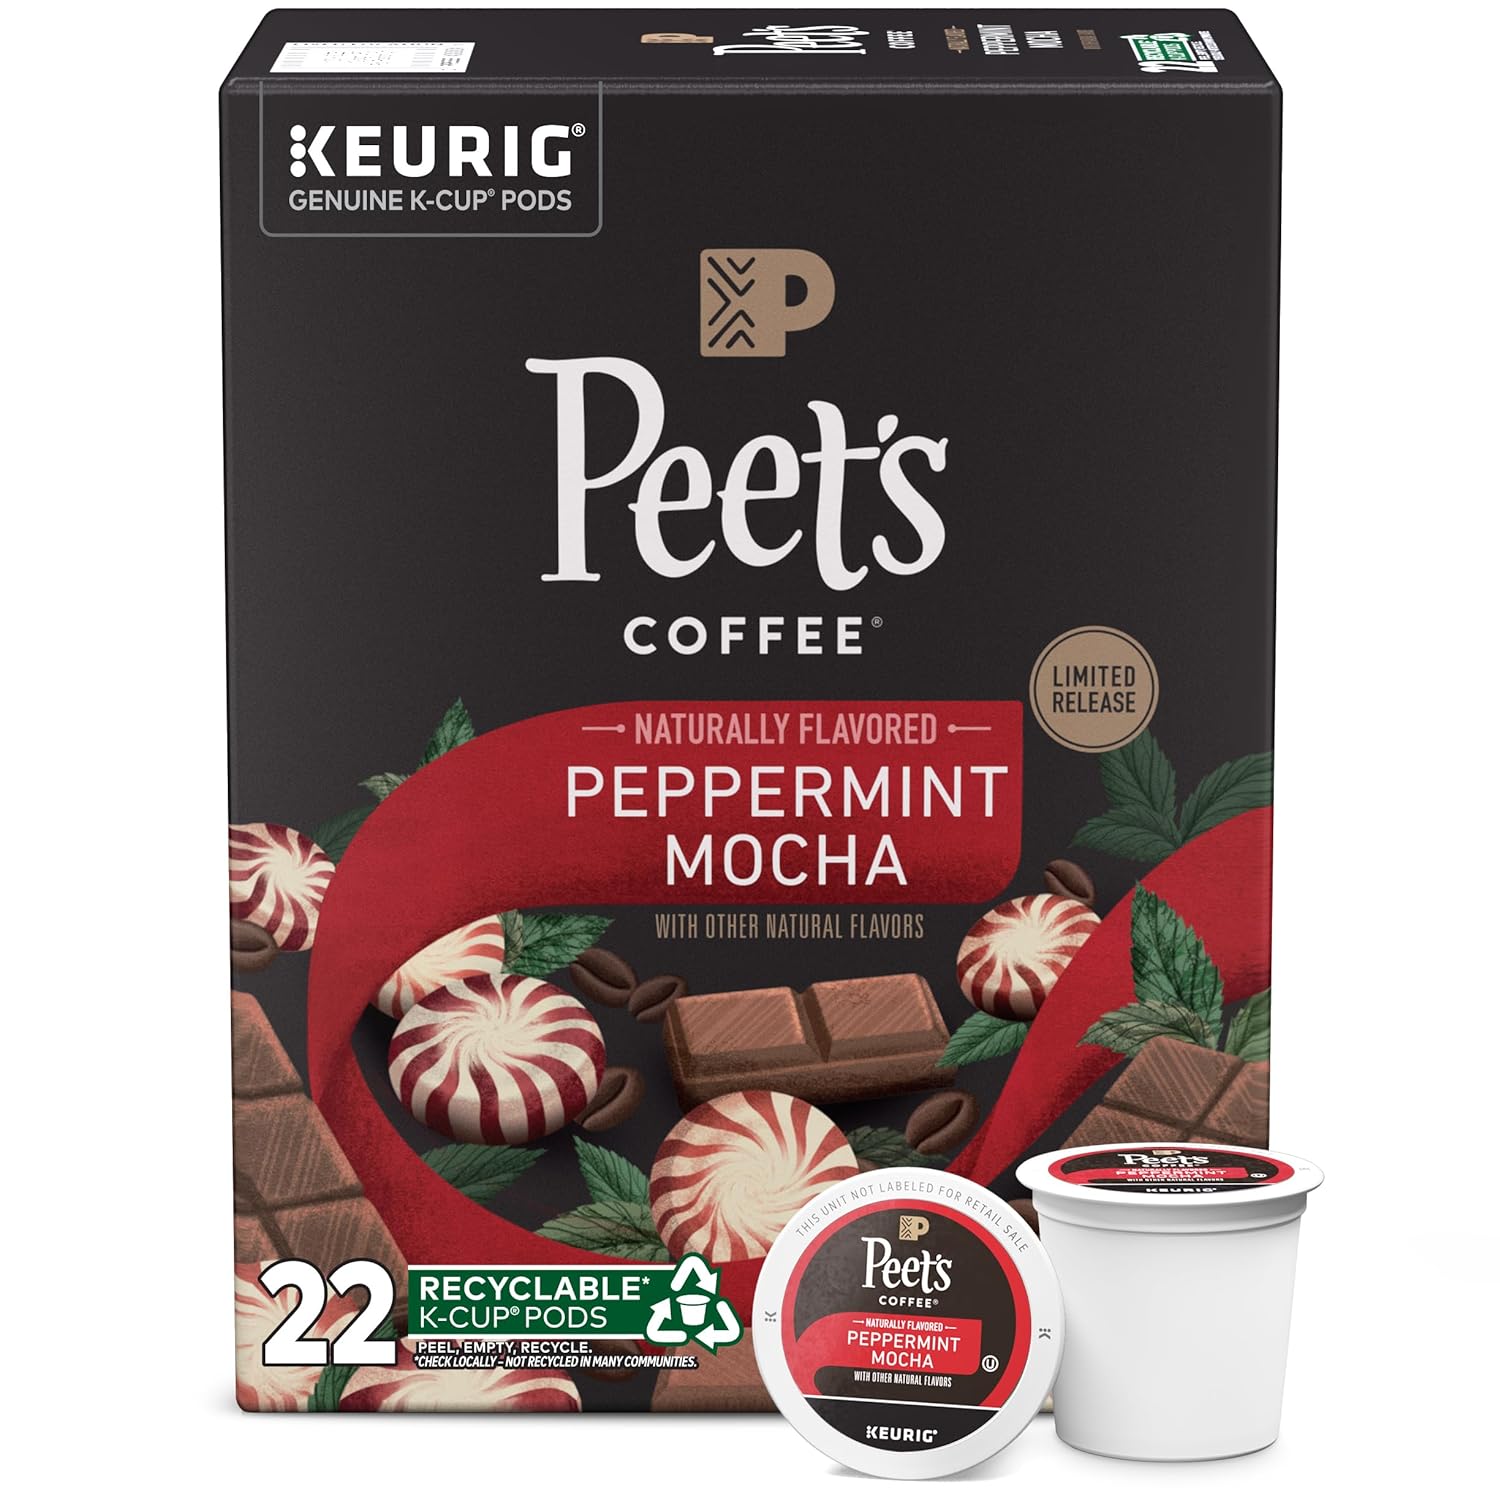 Peet's Coffee, Flavored Coffee K-Cup Pods for Keurig Brewers - Peppermint Mocha 22 Count (1 Box of 22 K-Cup Pods)